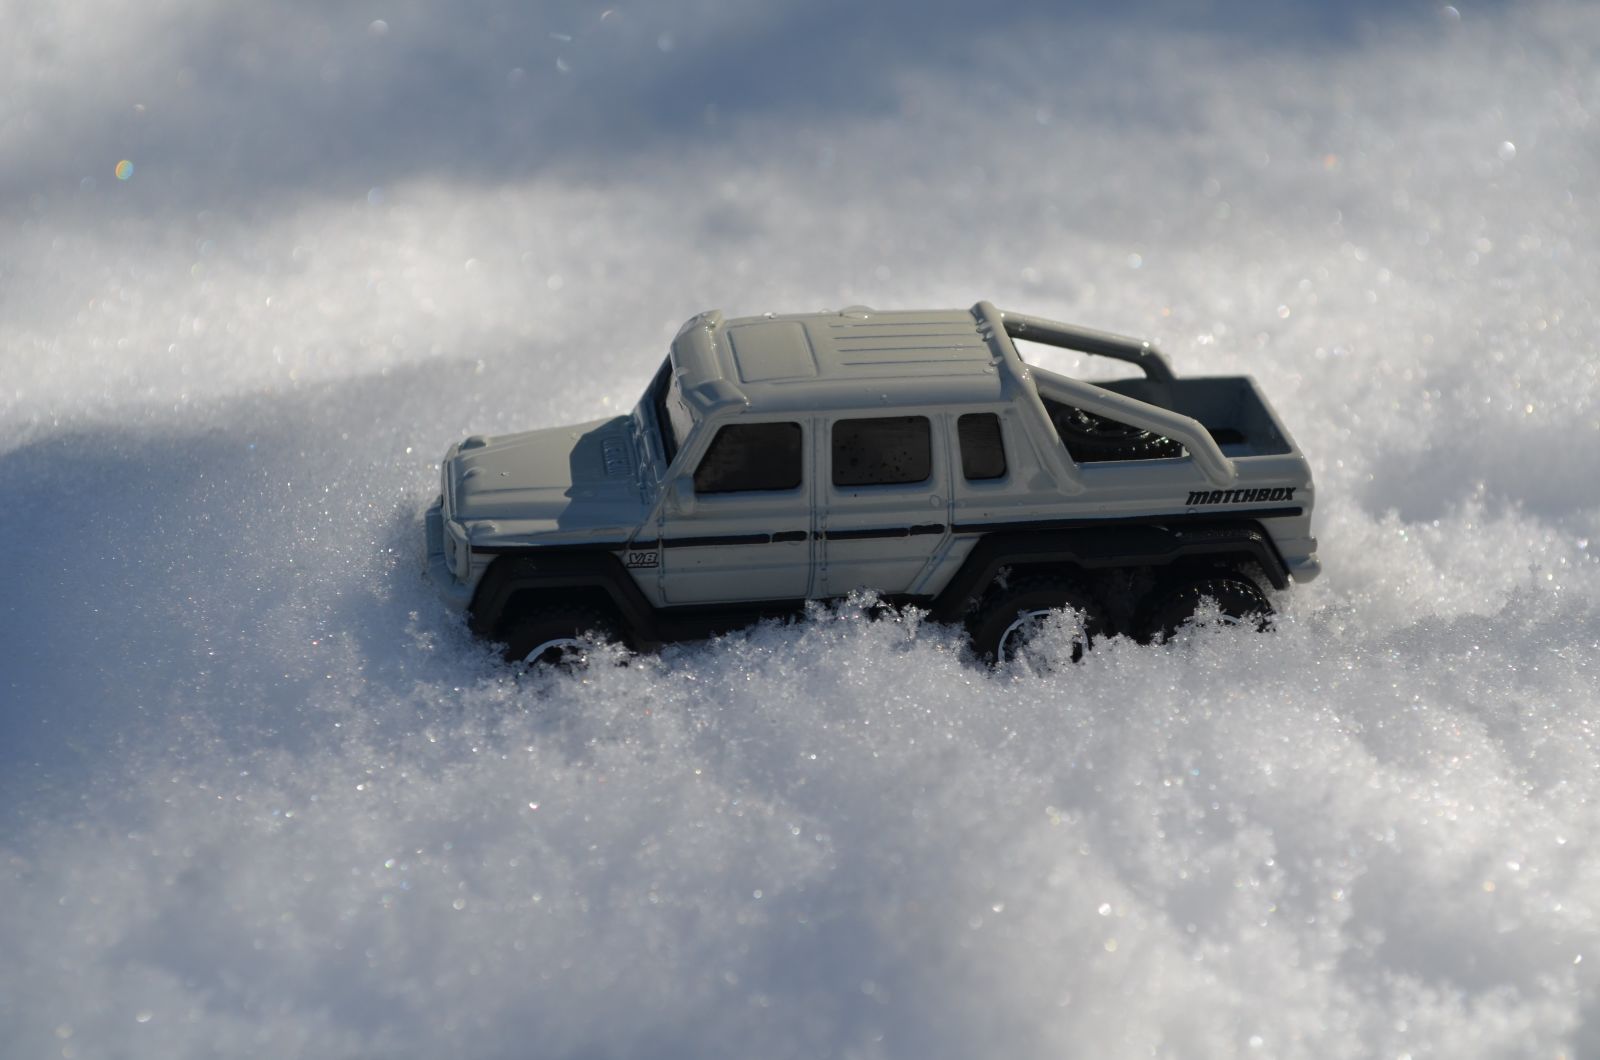 Psh, take your puny 4wd and go home. The 6x6 is here to show you how to REALLY drive through the snow. 